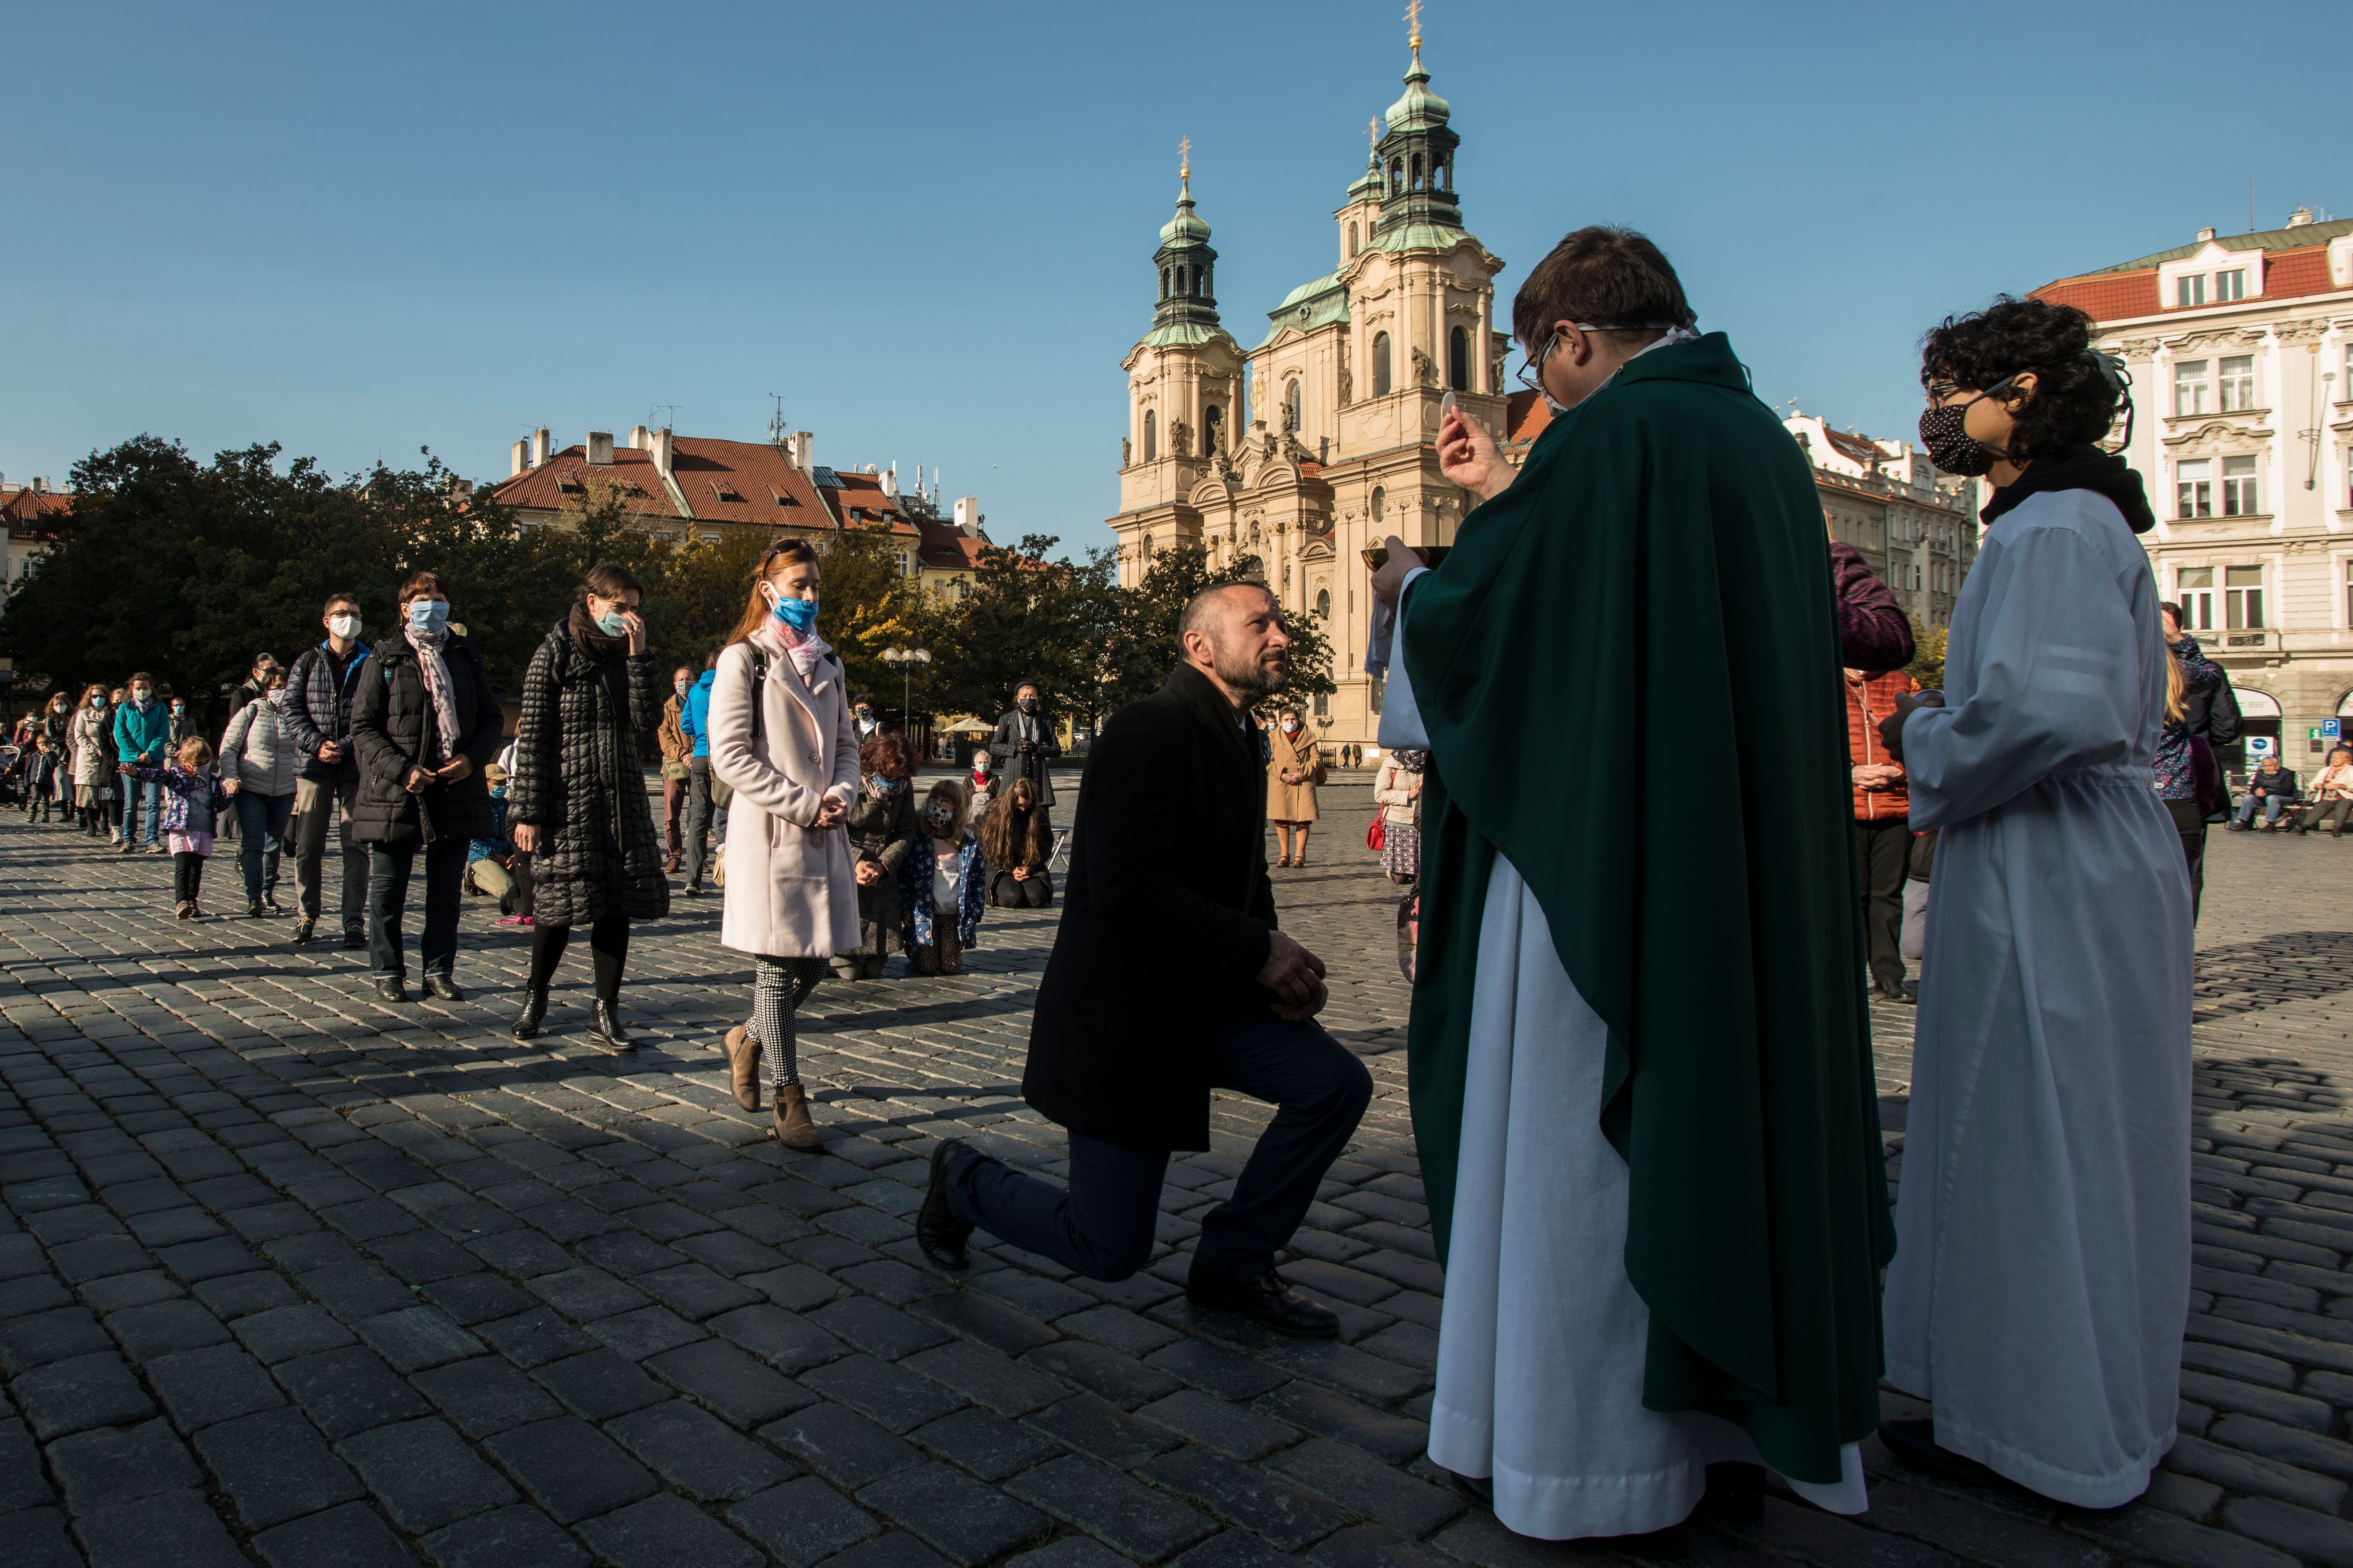 An outdoor mass at the Old Town Square in Prague on Oct. 26. The government is introducing new restrictions, including a 9 p.m. to 5 a.m. curfew, effective Oct. 28 through Nov. 3. 